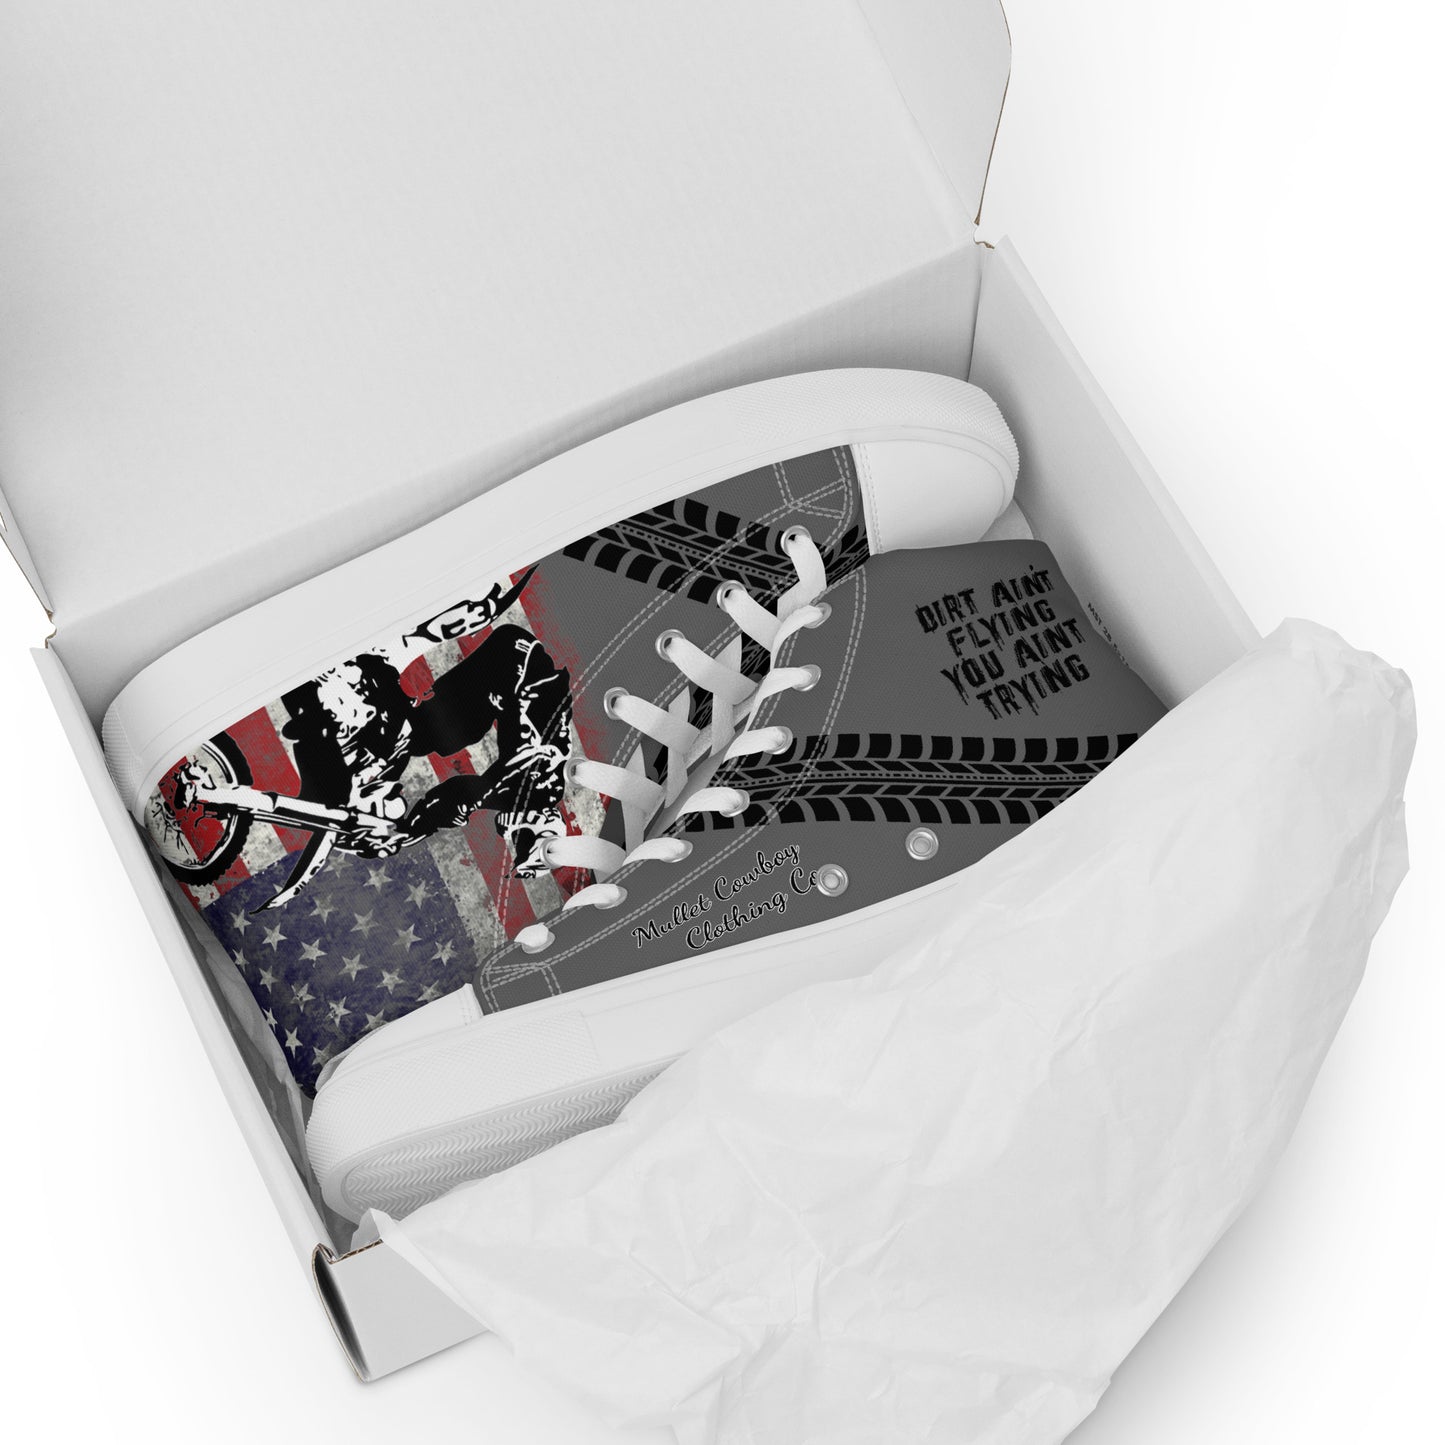 Mullet Cowboy Men’s high top canvas shoes - american, american flag, cowboy, flag, high top, hightop, moto cross, motocross, mullet, mullet cowboy, mullet cowboy clothing co, shoes -  - Baha Ranch Western Wear